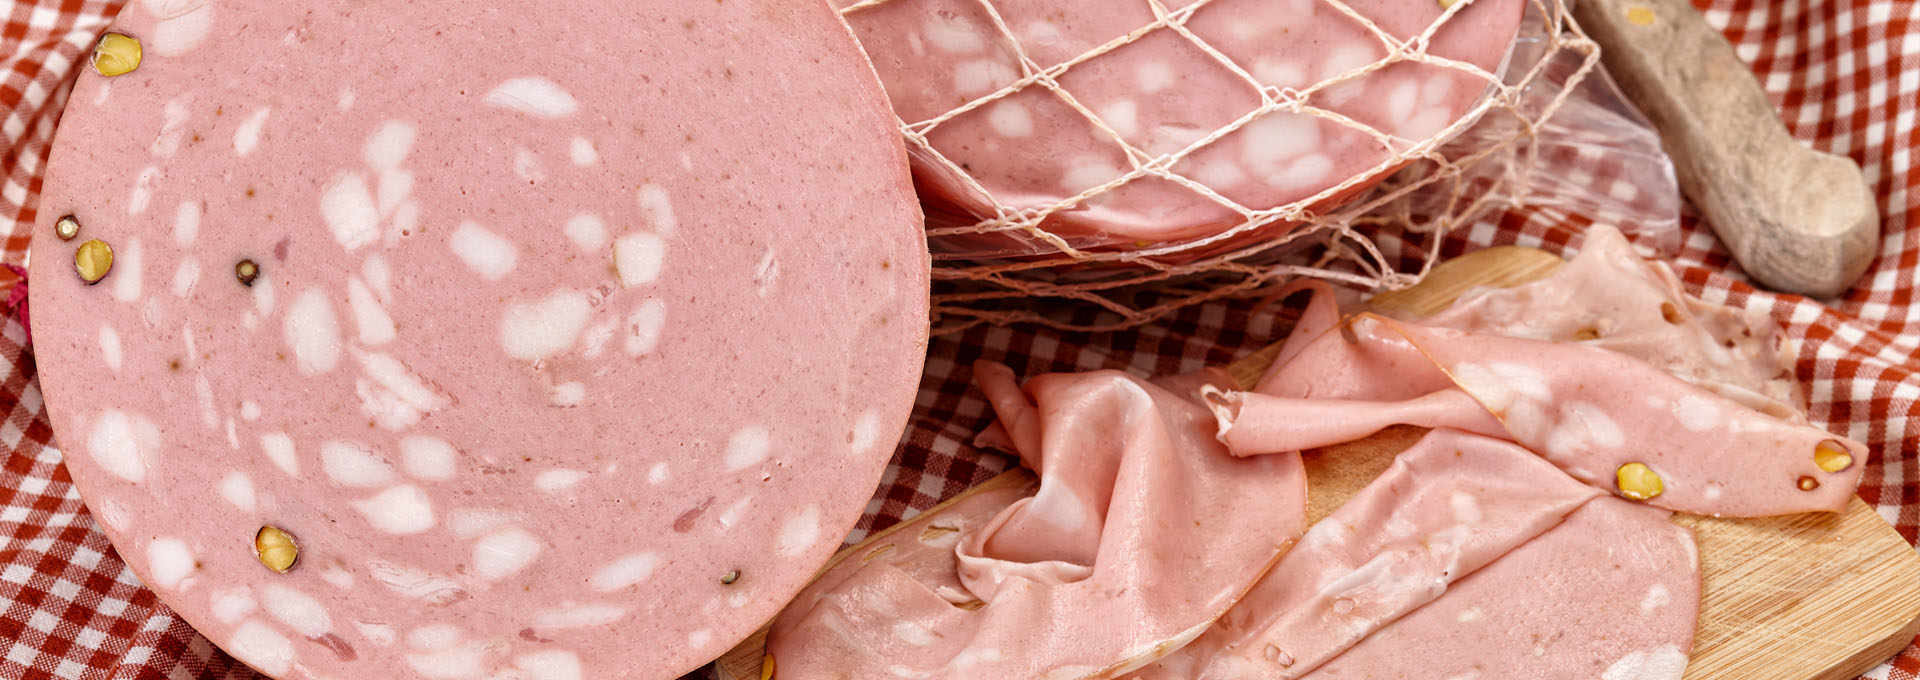 Mortadella: Rich, Flavourful and Healthy